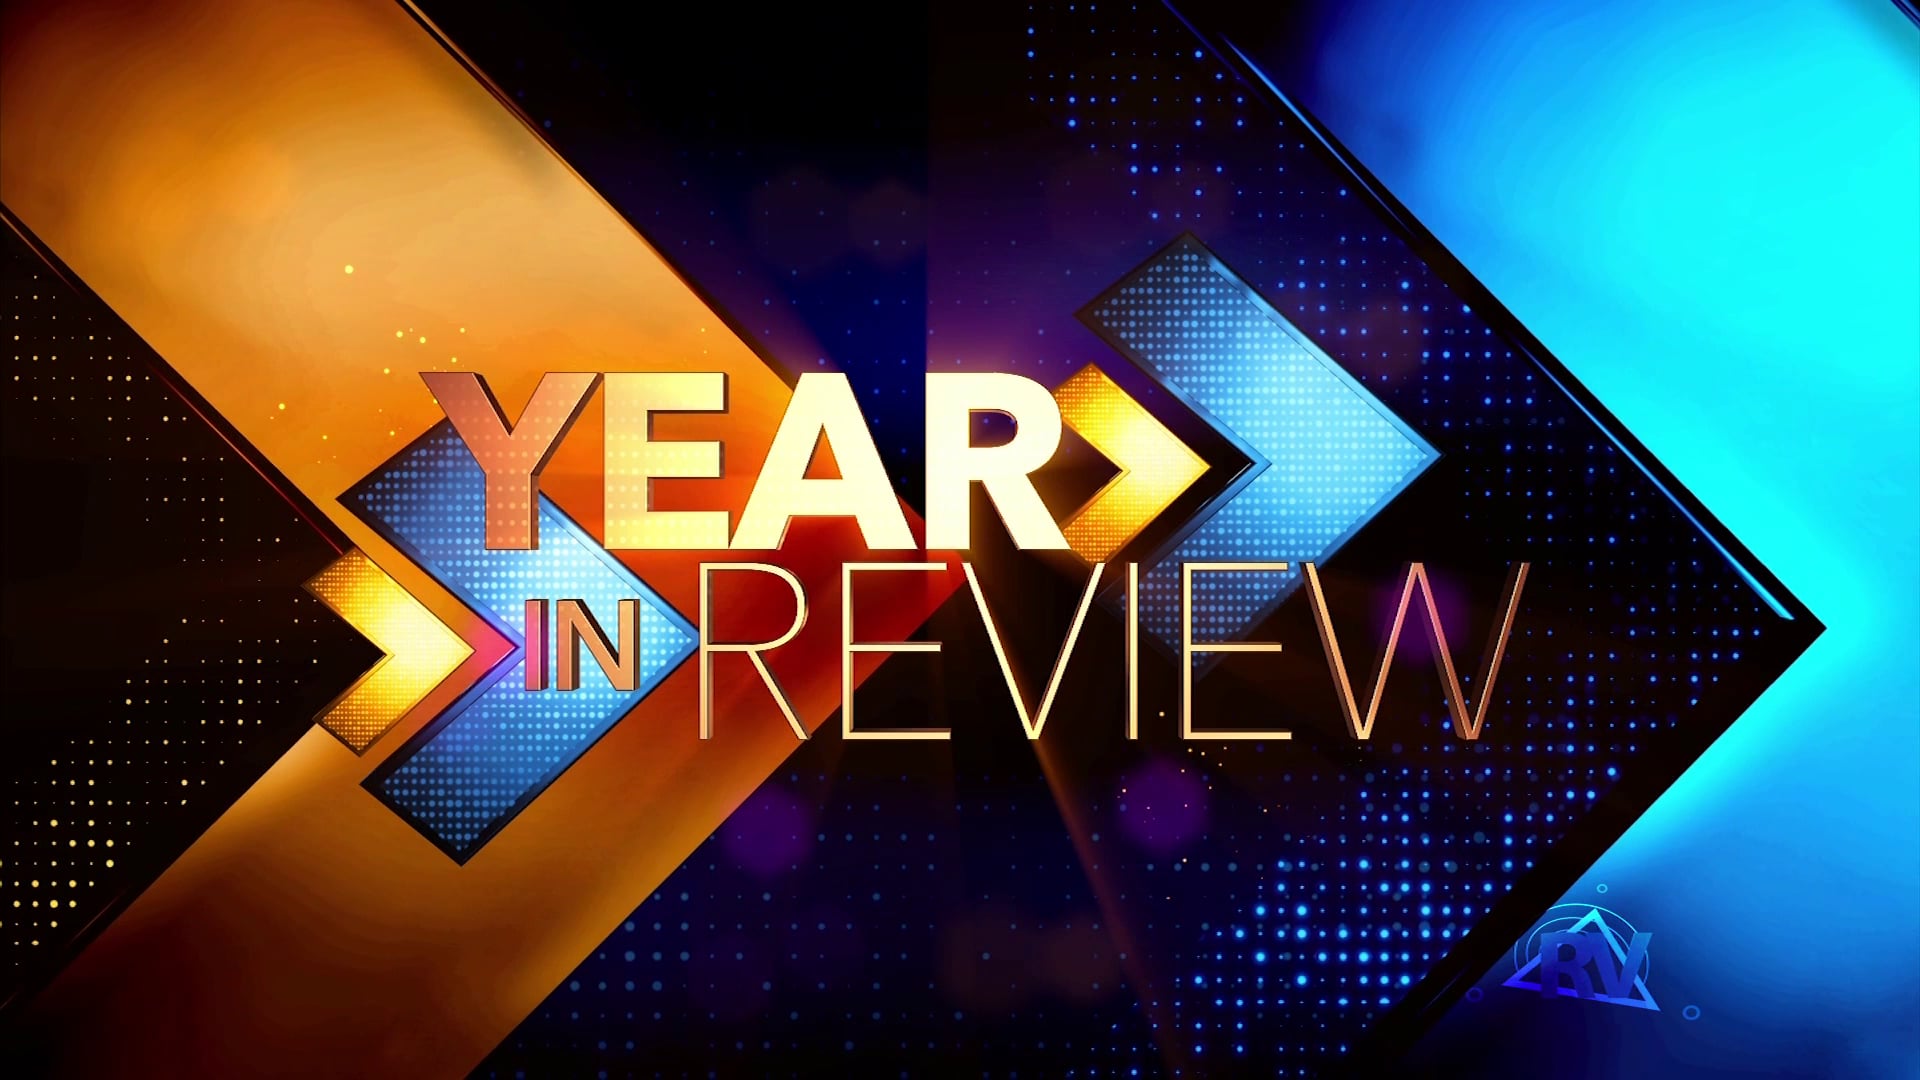 News 12- Year In Review Intro